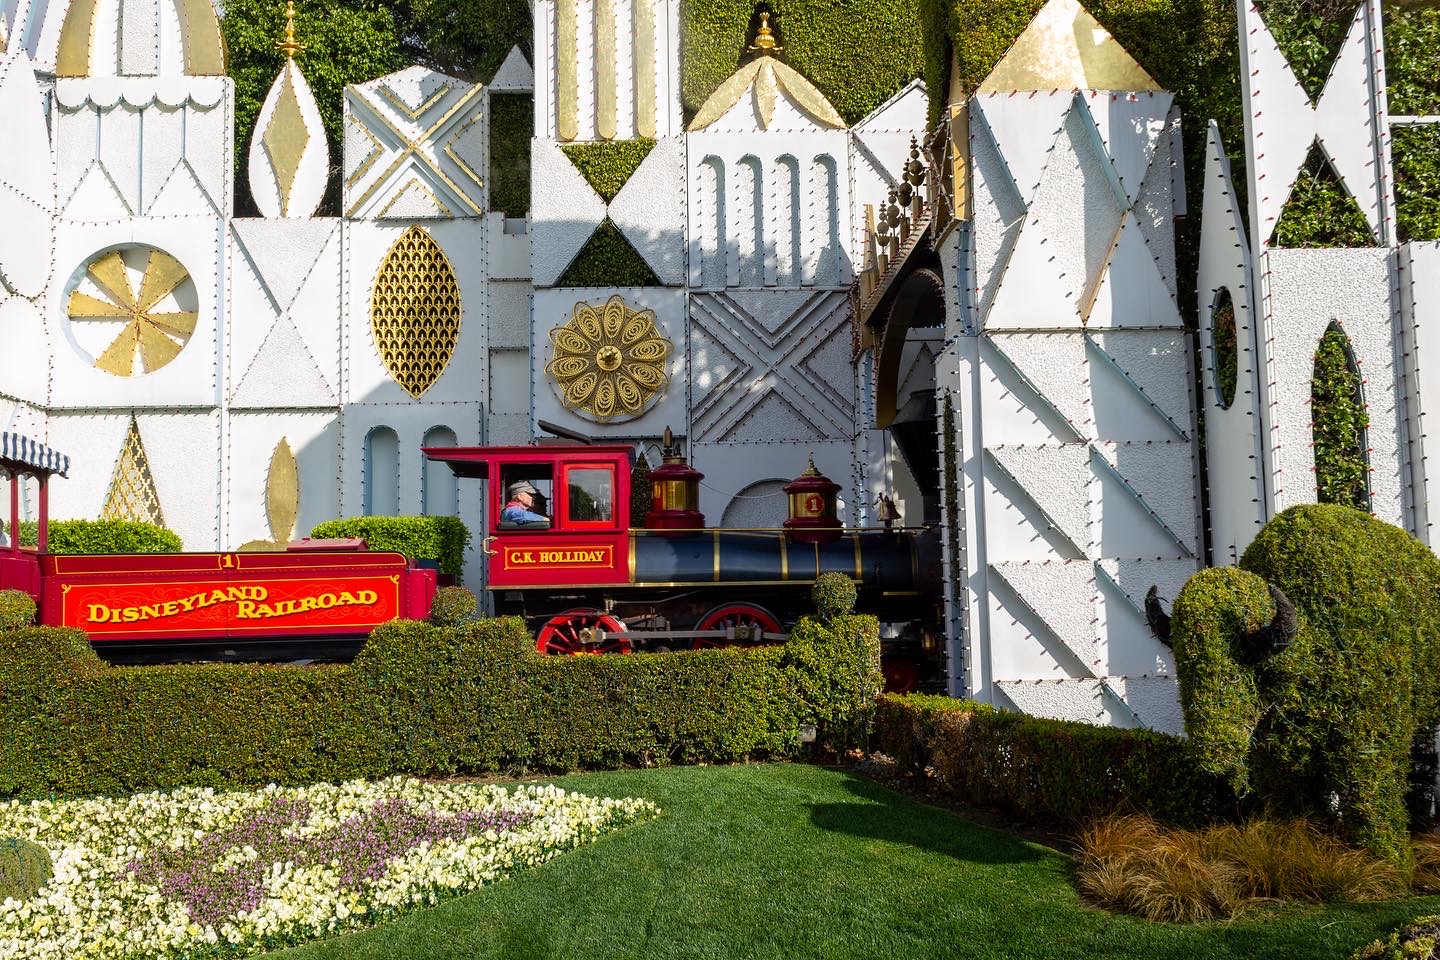 The bright red Disneyland Railroad train travels in front of the textured white and gold panels of the It's a Small World ride